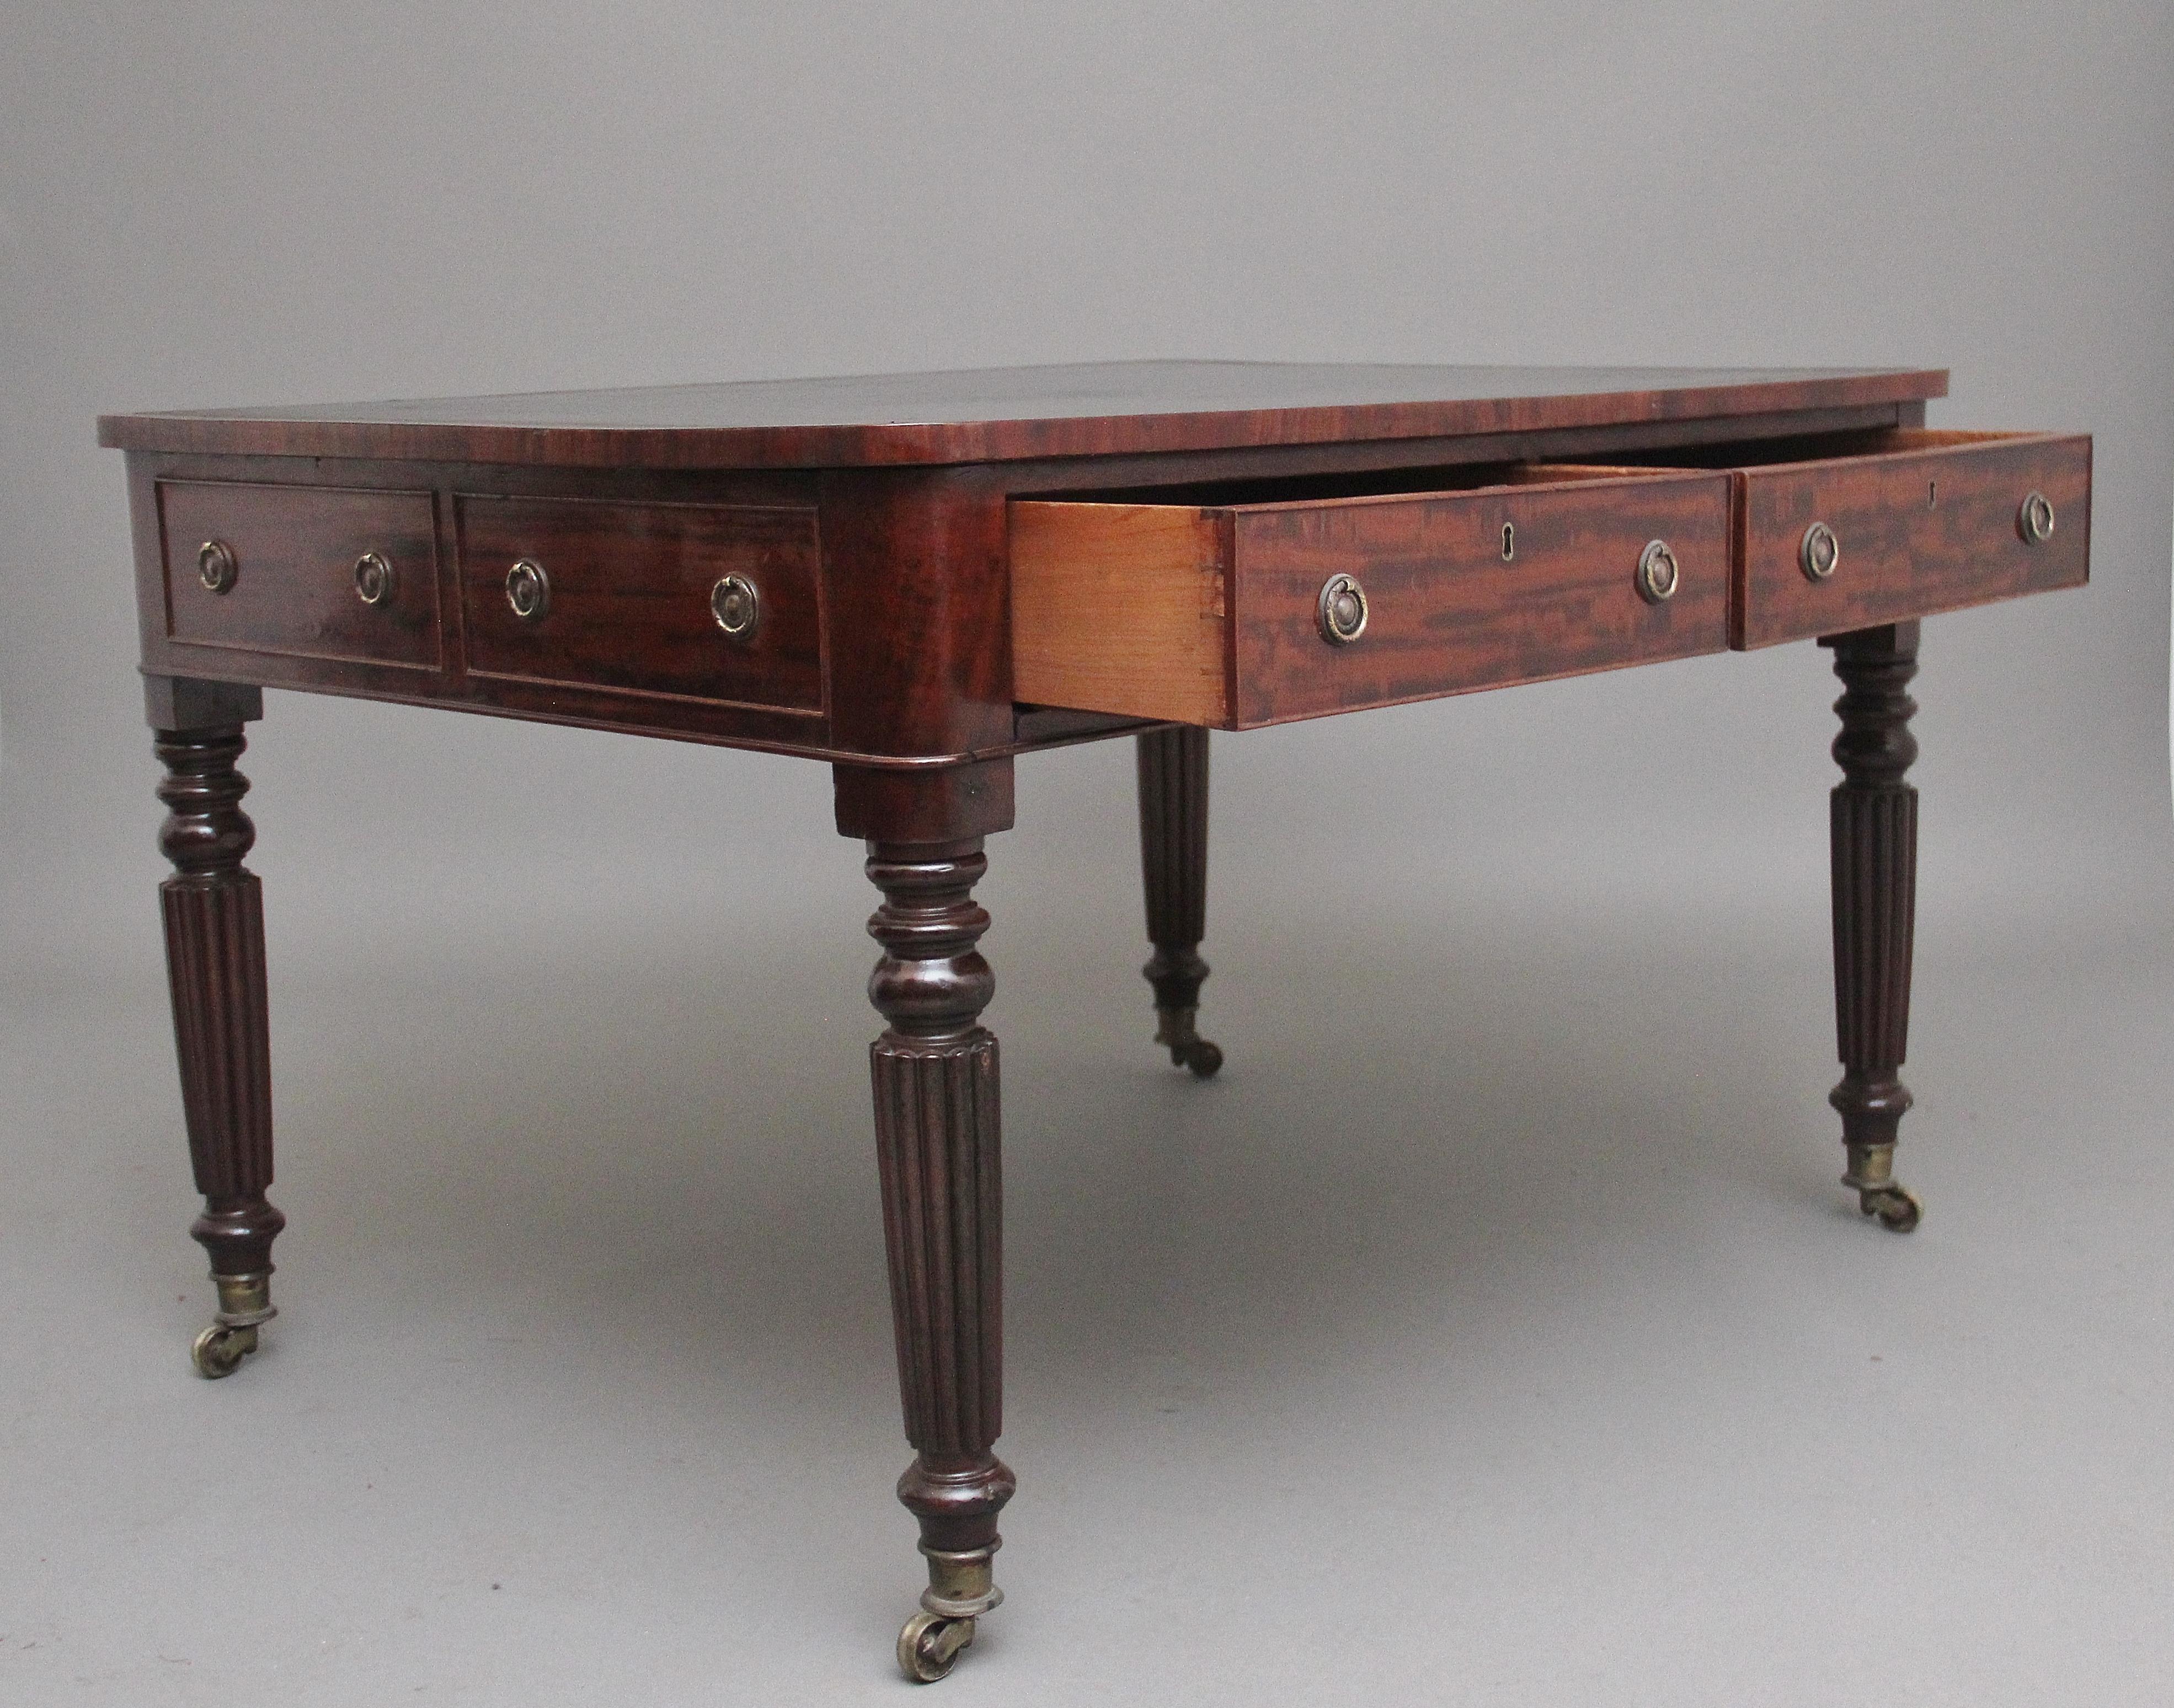 19th century Mahogany partners writing table, having a black leather writing surface decorated with gilt and blind tooling , two drawers either side with the original brass ring handles, with faux drawers on each end, supported on turned and fluted